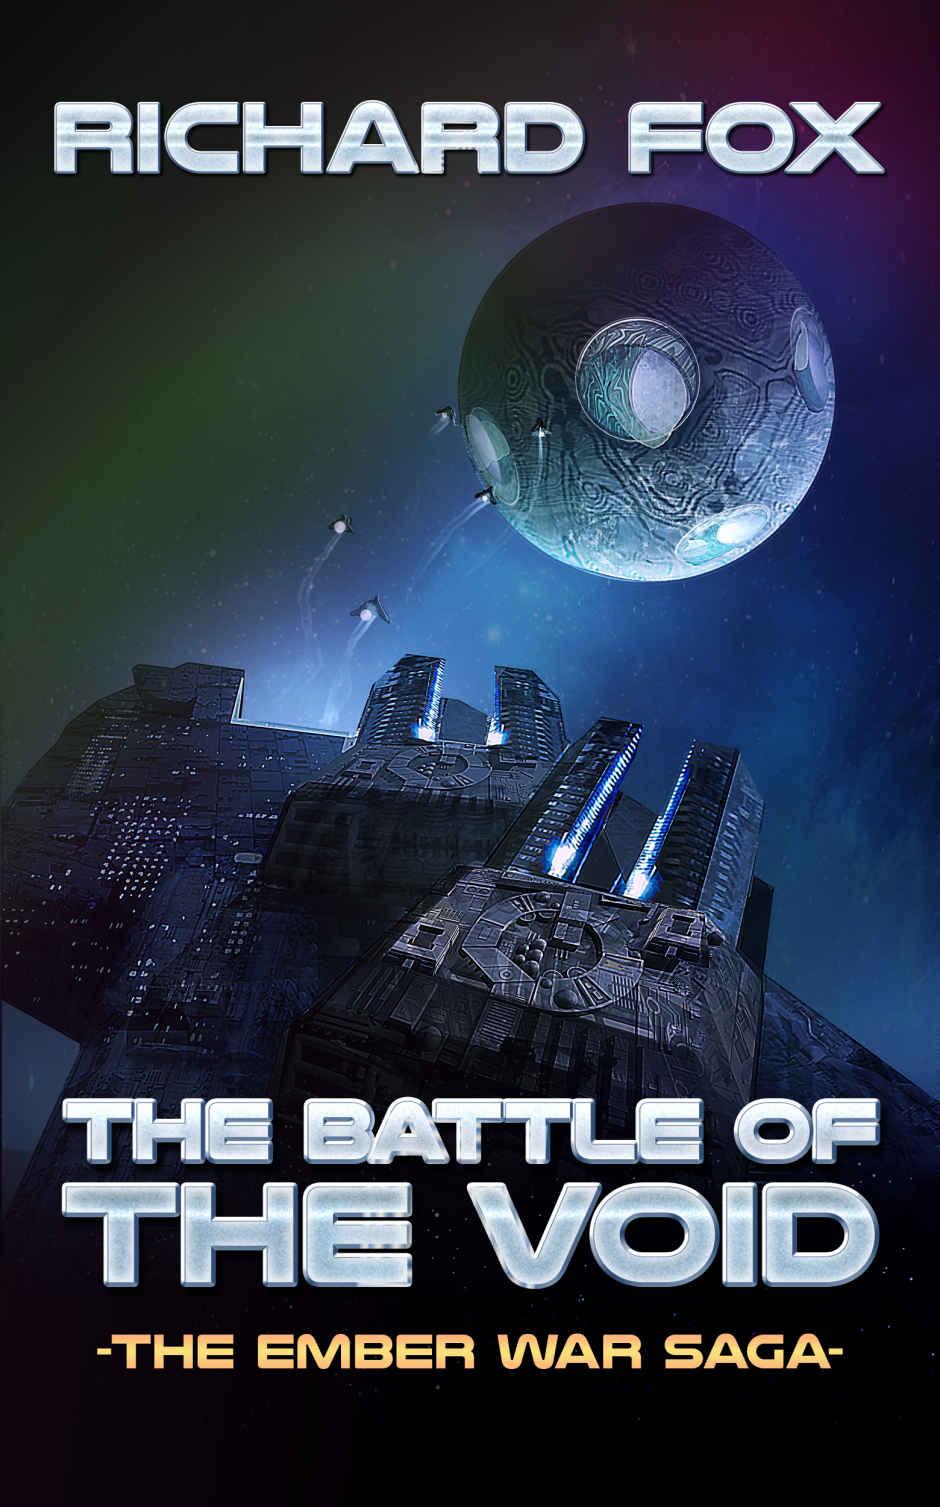 The Battle of the Void (The Ember War Saga Book 6)